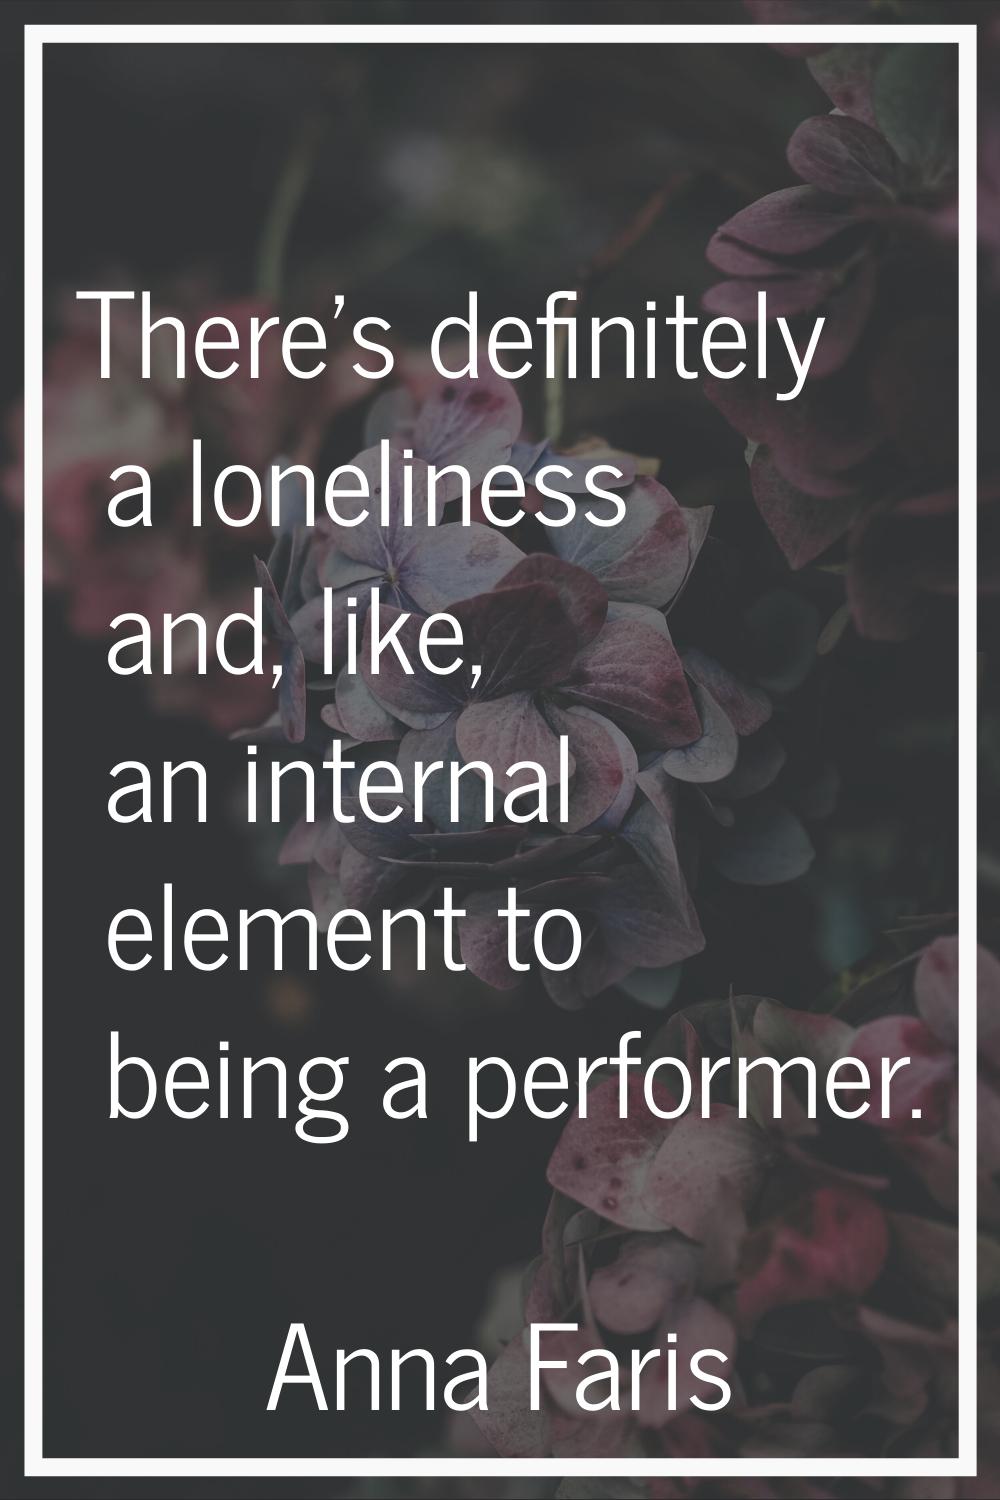 There's definitely a loneliness and, like, an internal element to being a performer.